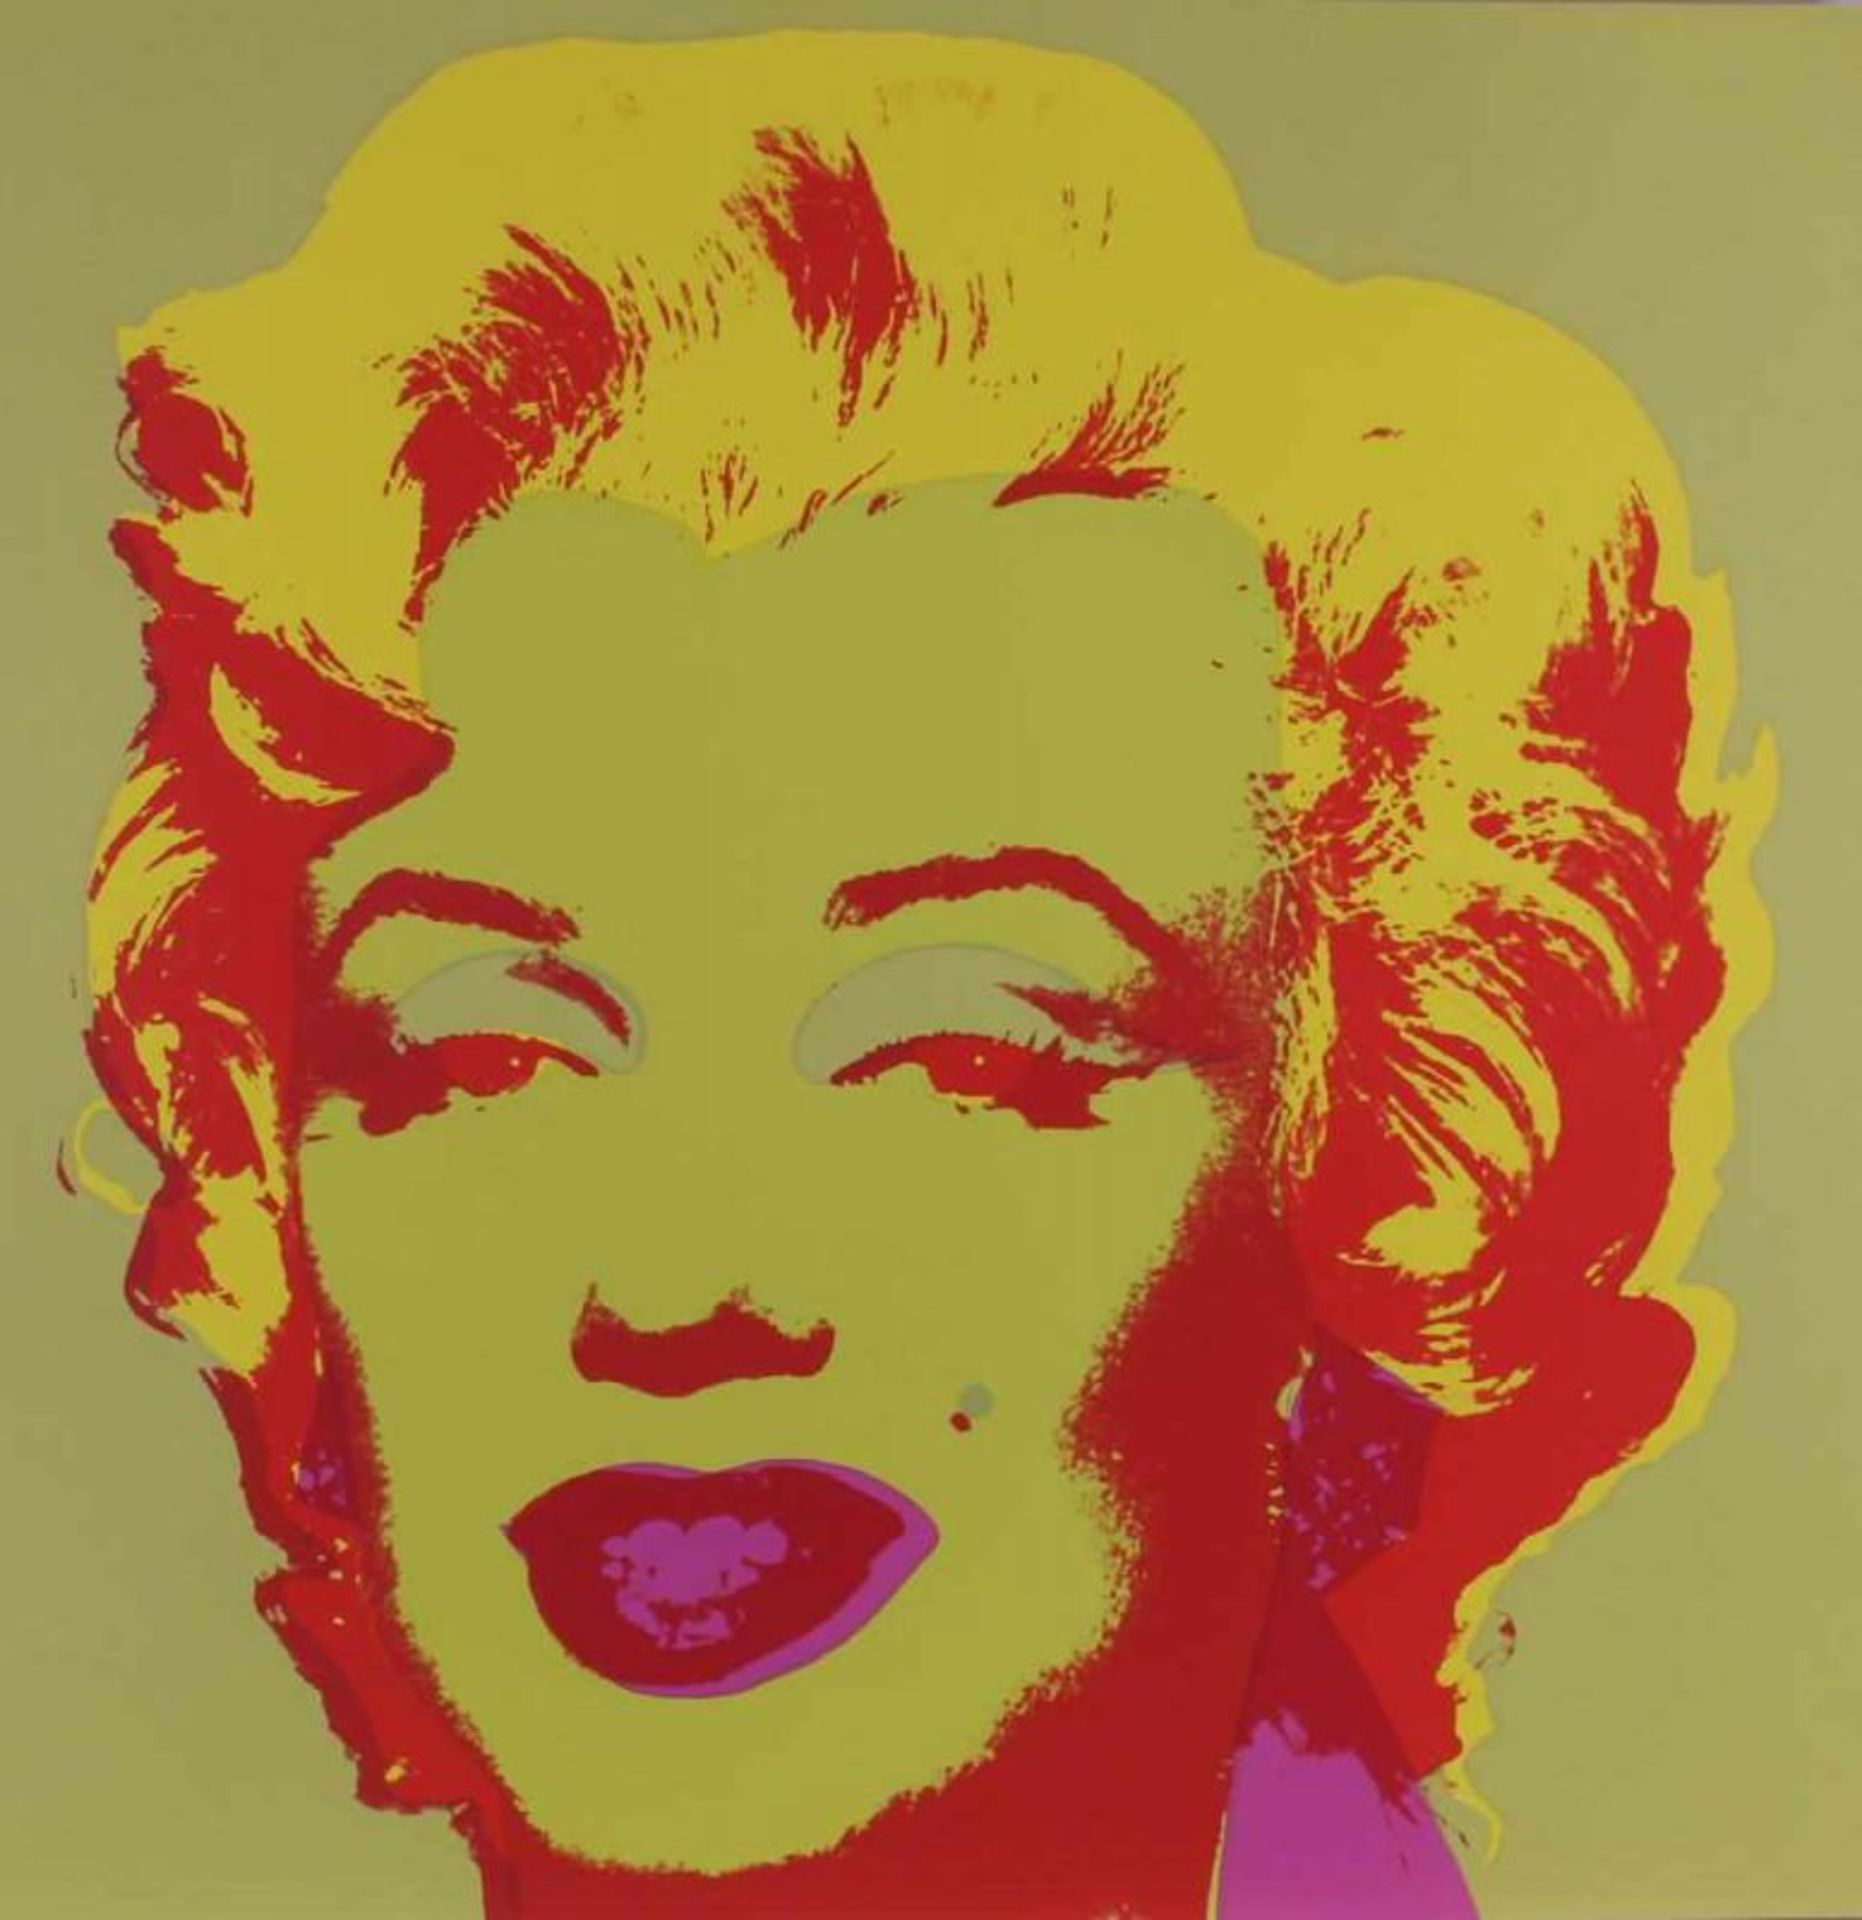 Warhol, Andy (1928 Pittsburgh - 1987 New York), 10 Farbserigrafien, "Marilyn Monroe", published by - Image 8 of 10